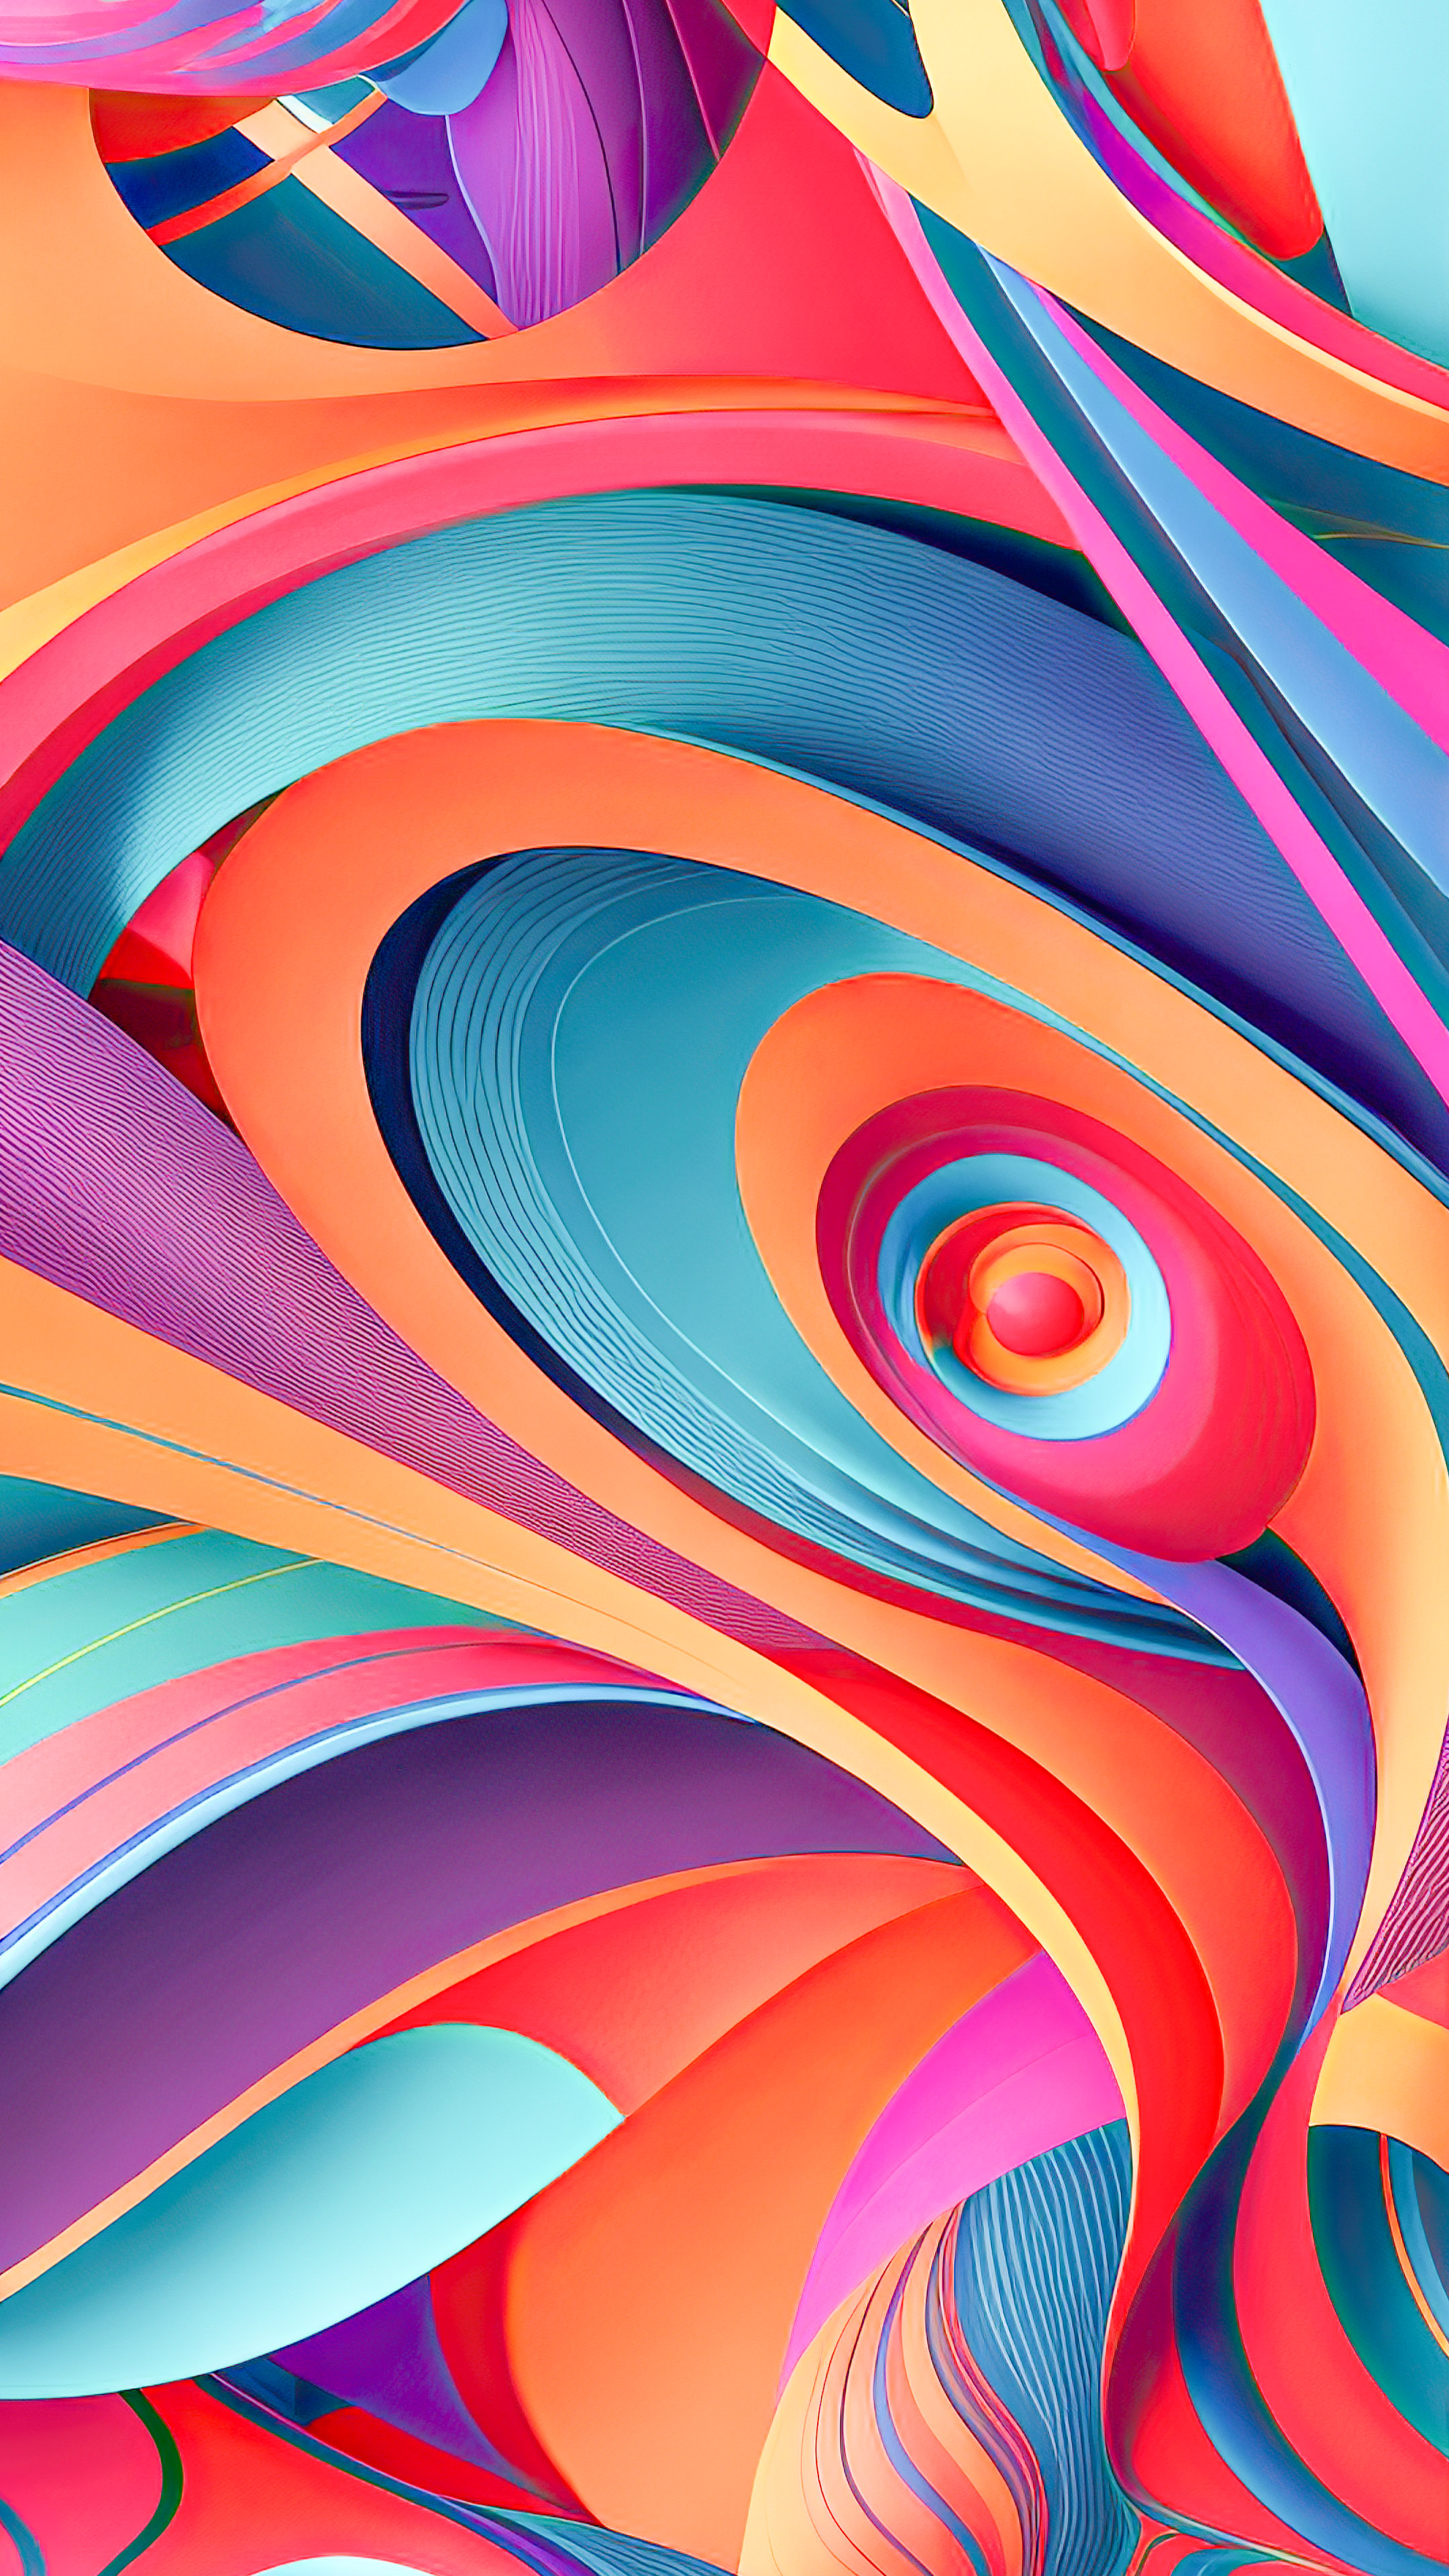 Adorn your screen with colorful abstract art iPhone wallpaper, featuring a blend of vibrant colors, fluid lines, and intricate geometric shapes for a lively aesthetic.